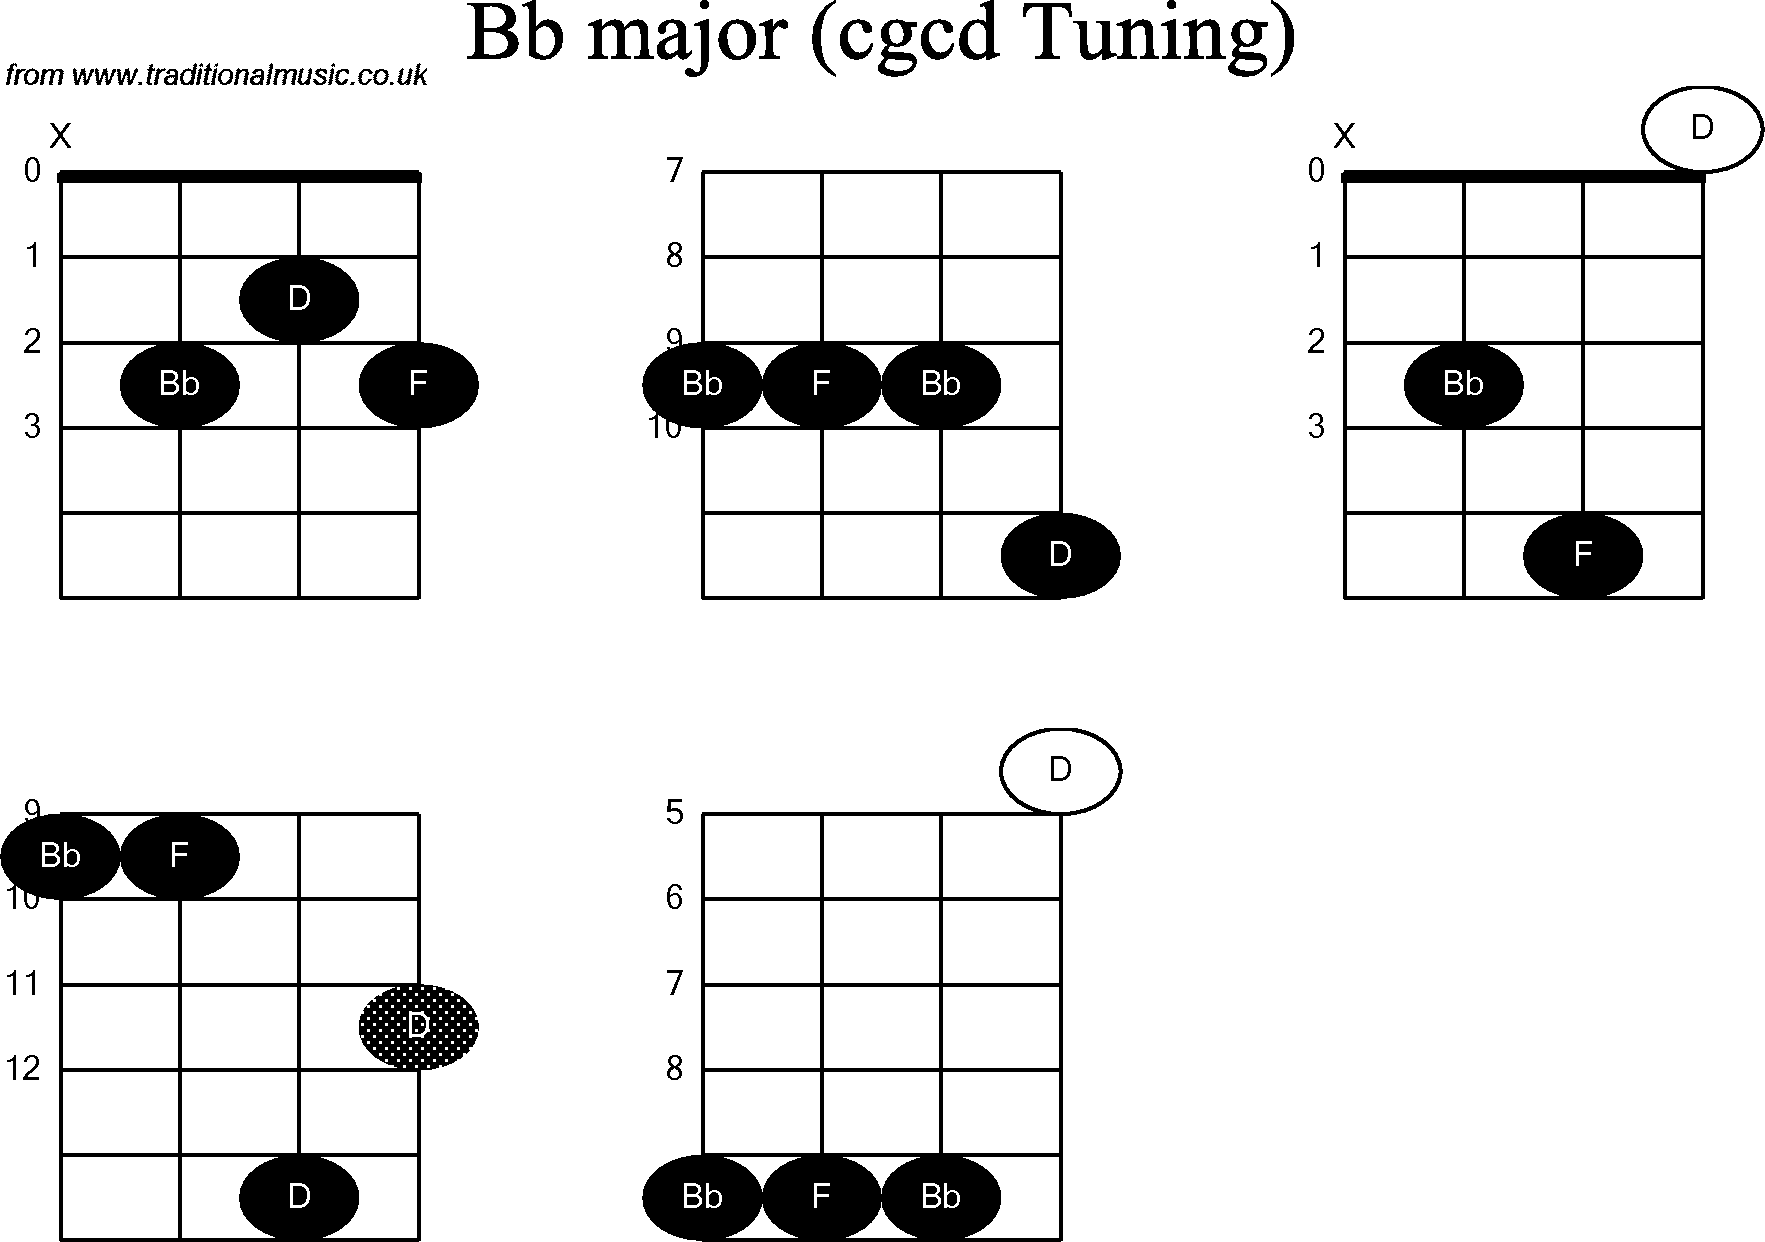 Chord diagrams for Banjo(Double C) Bb